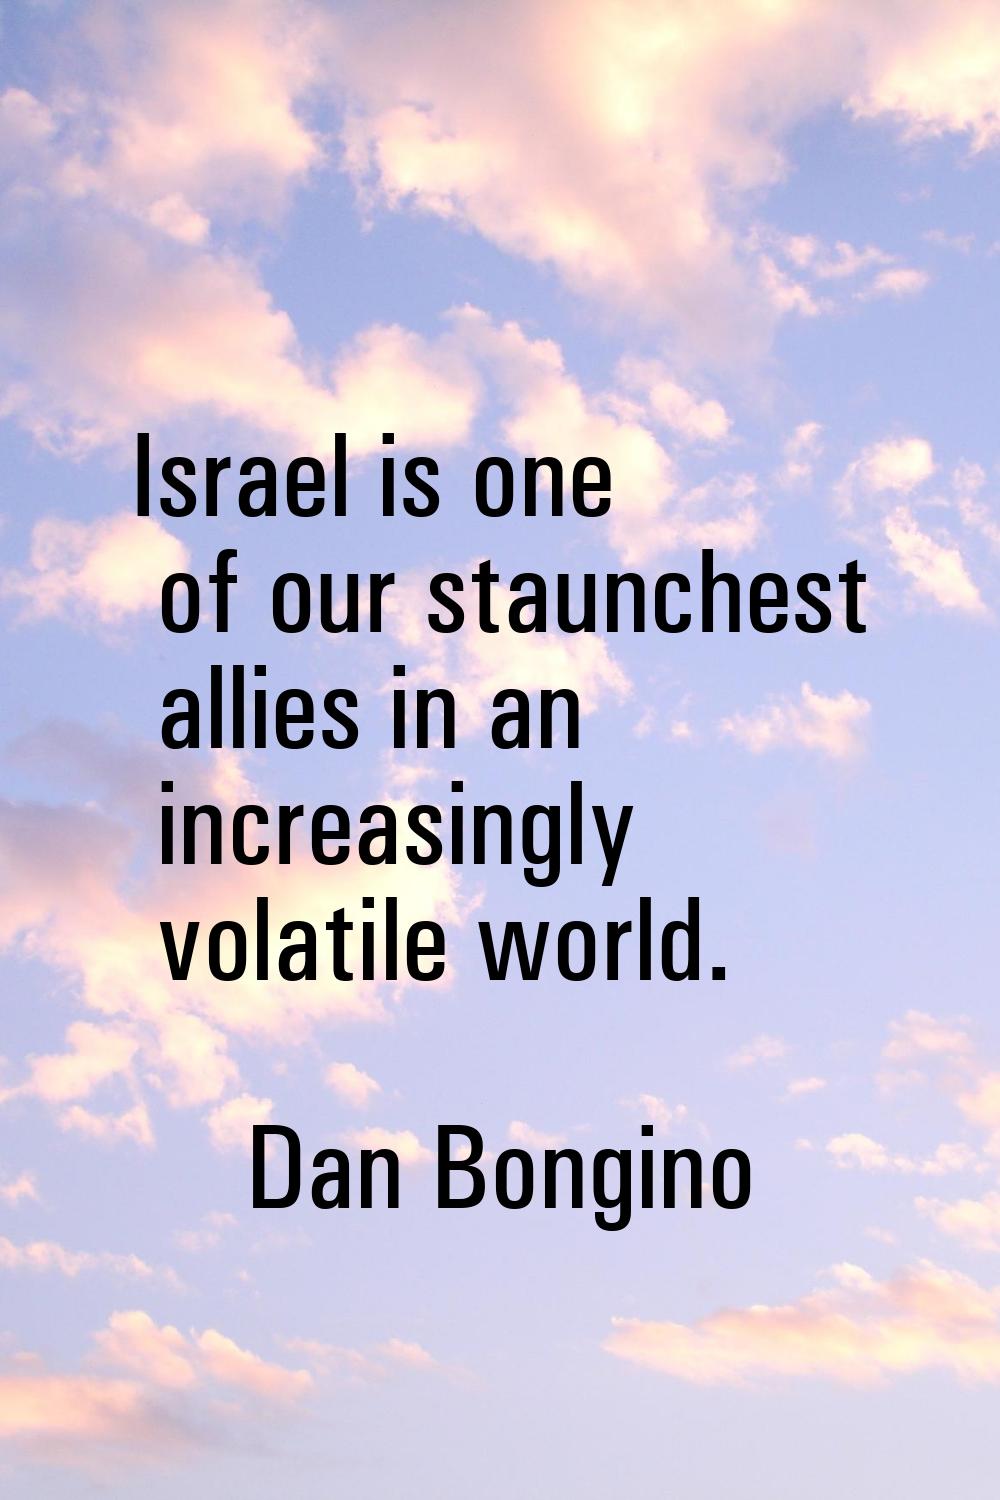 Israel is one of our staunchest allies in an increasingly volatile world.